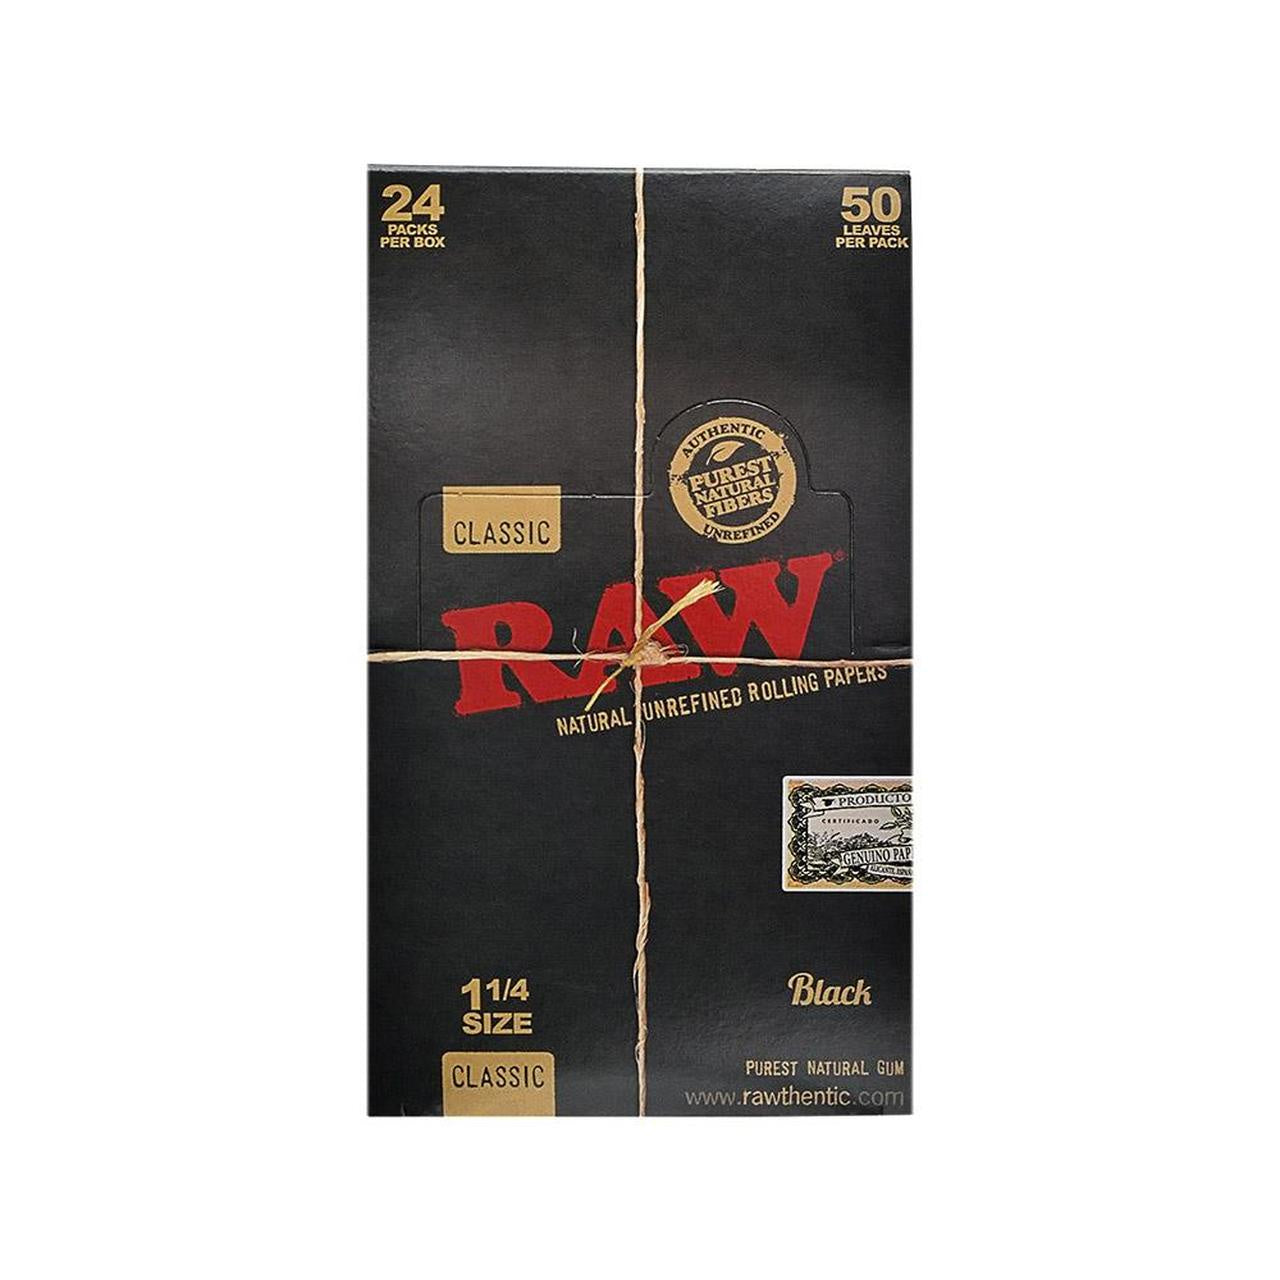 RAW 1 1/4 Black Papers